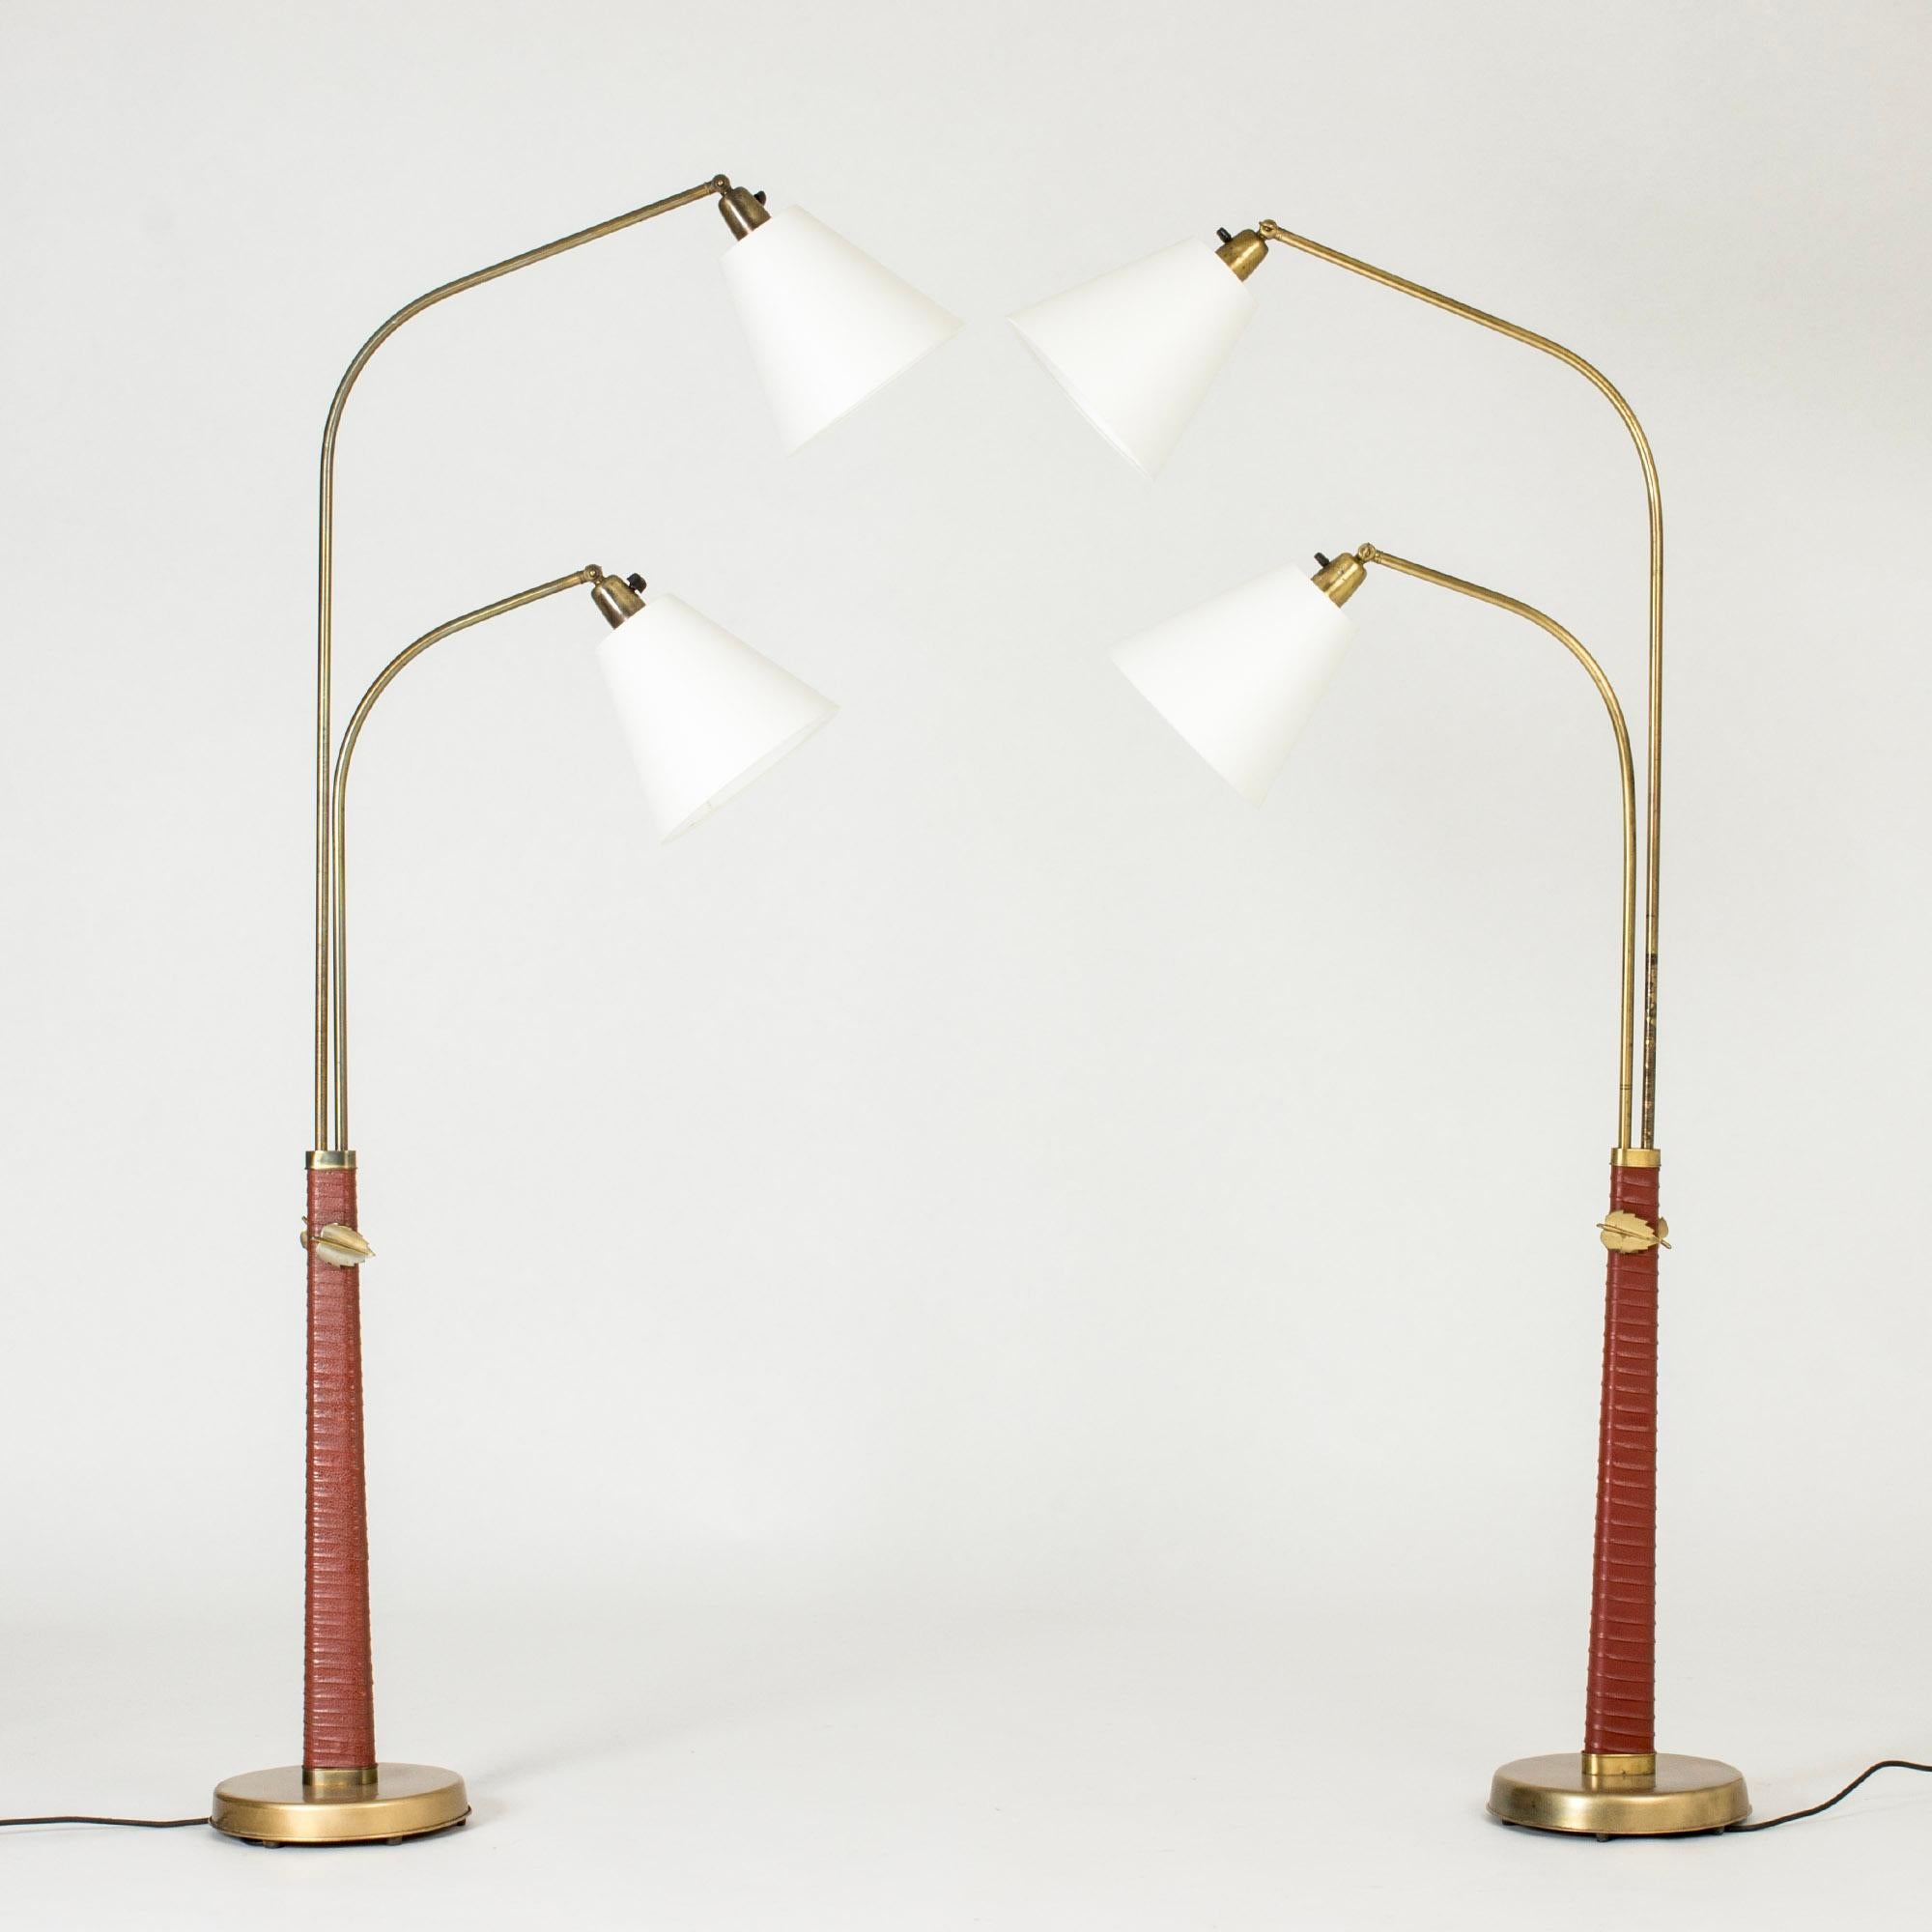 Pair of rare floor lamps by Hans Bergström, early model made in the 1930s. Double brass stems and lamp shades that can be swung into different positions. Tapering bases wound with brown leather. Decorative brass leaves that can be loosened to adjust